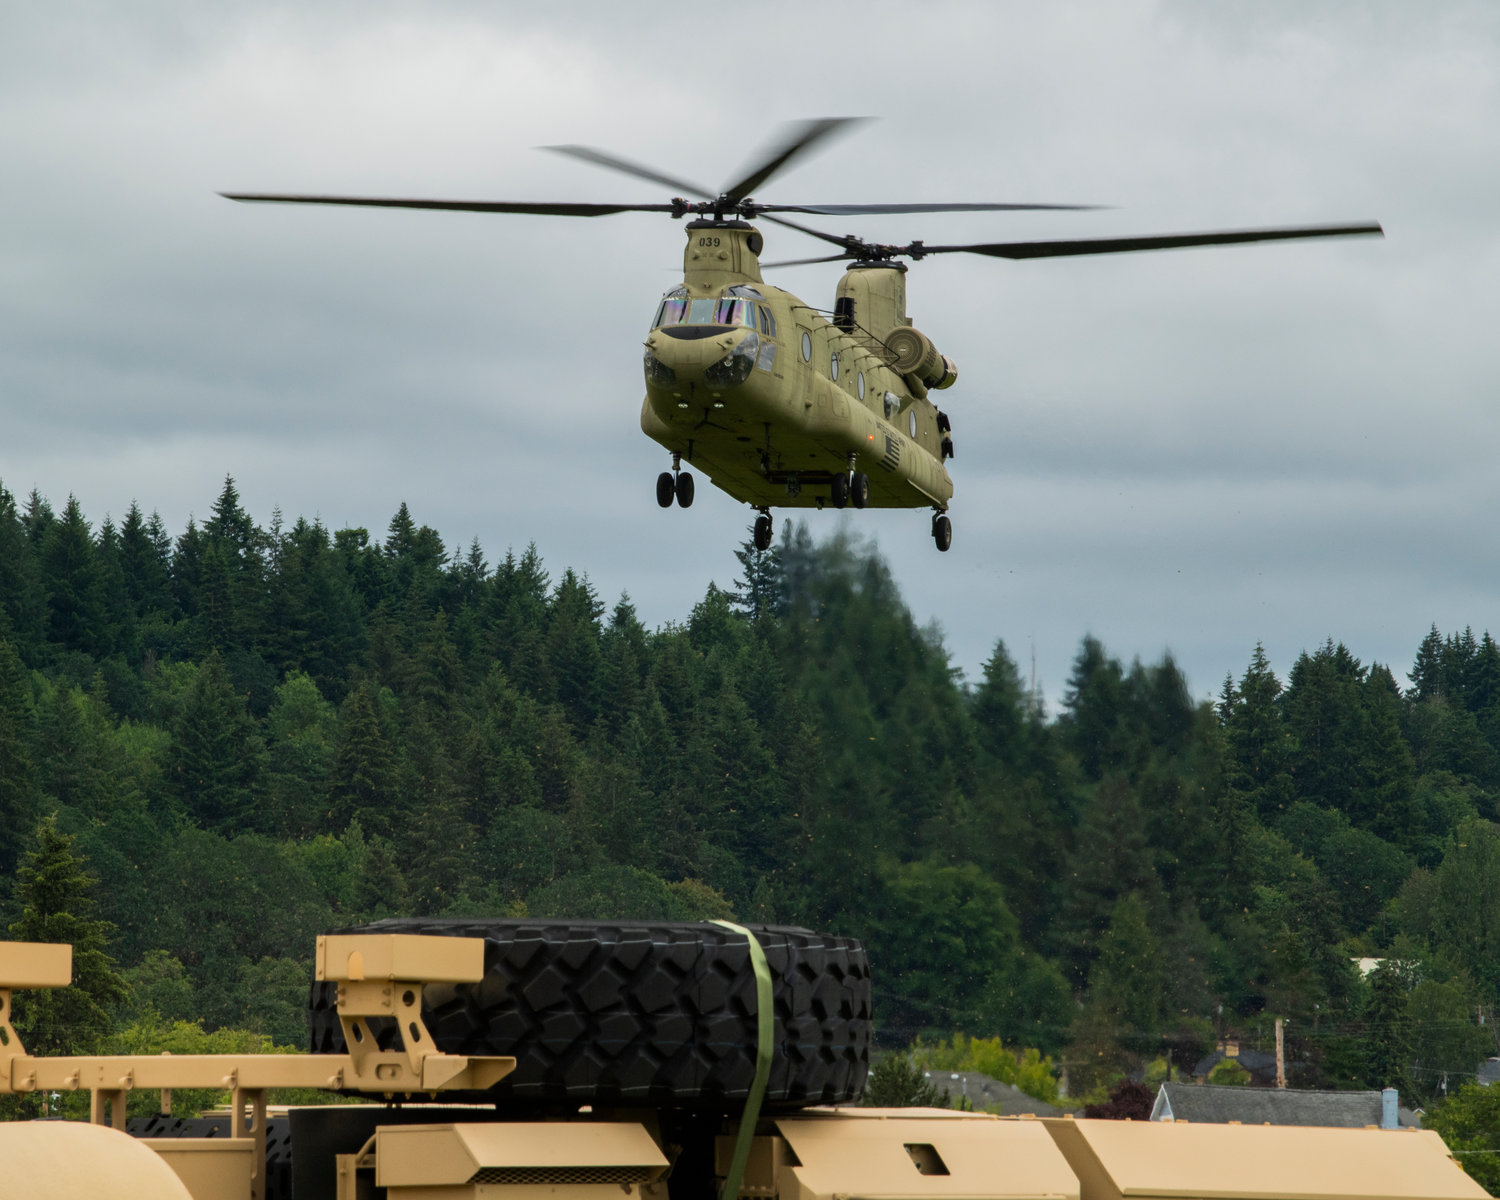 A Chinook helicopter prepares to land at the Chehalis-Centralia Airport during a military training exercise on Wednesday, June 22.